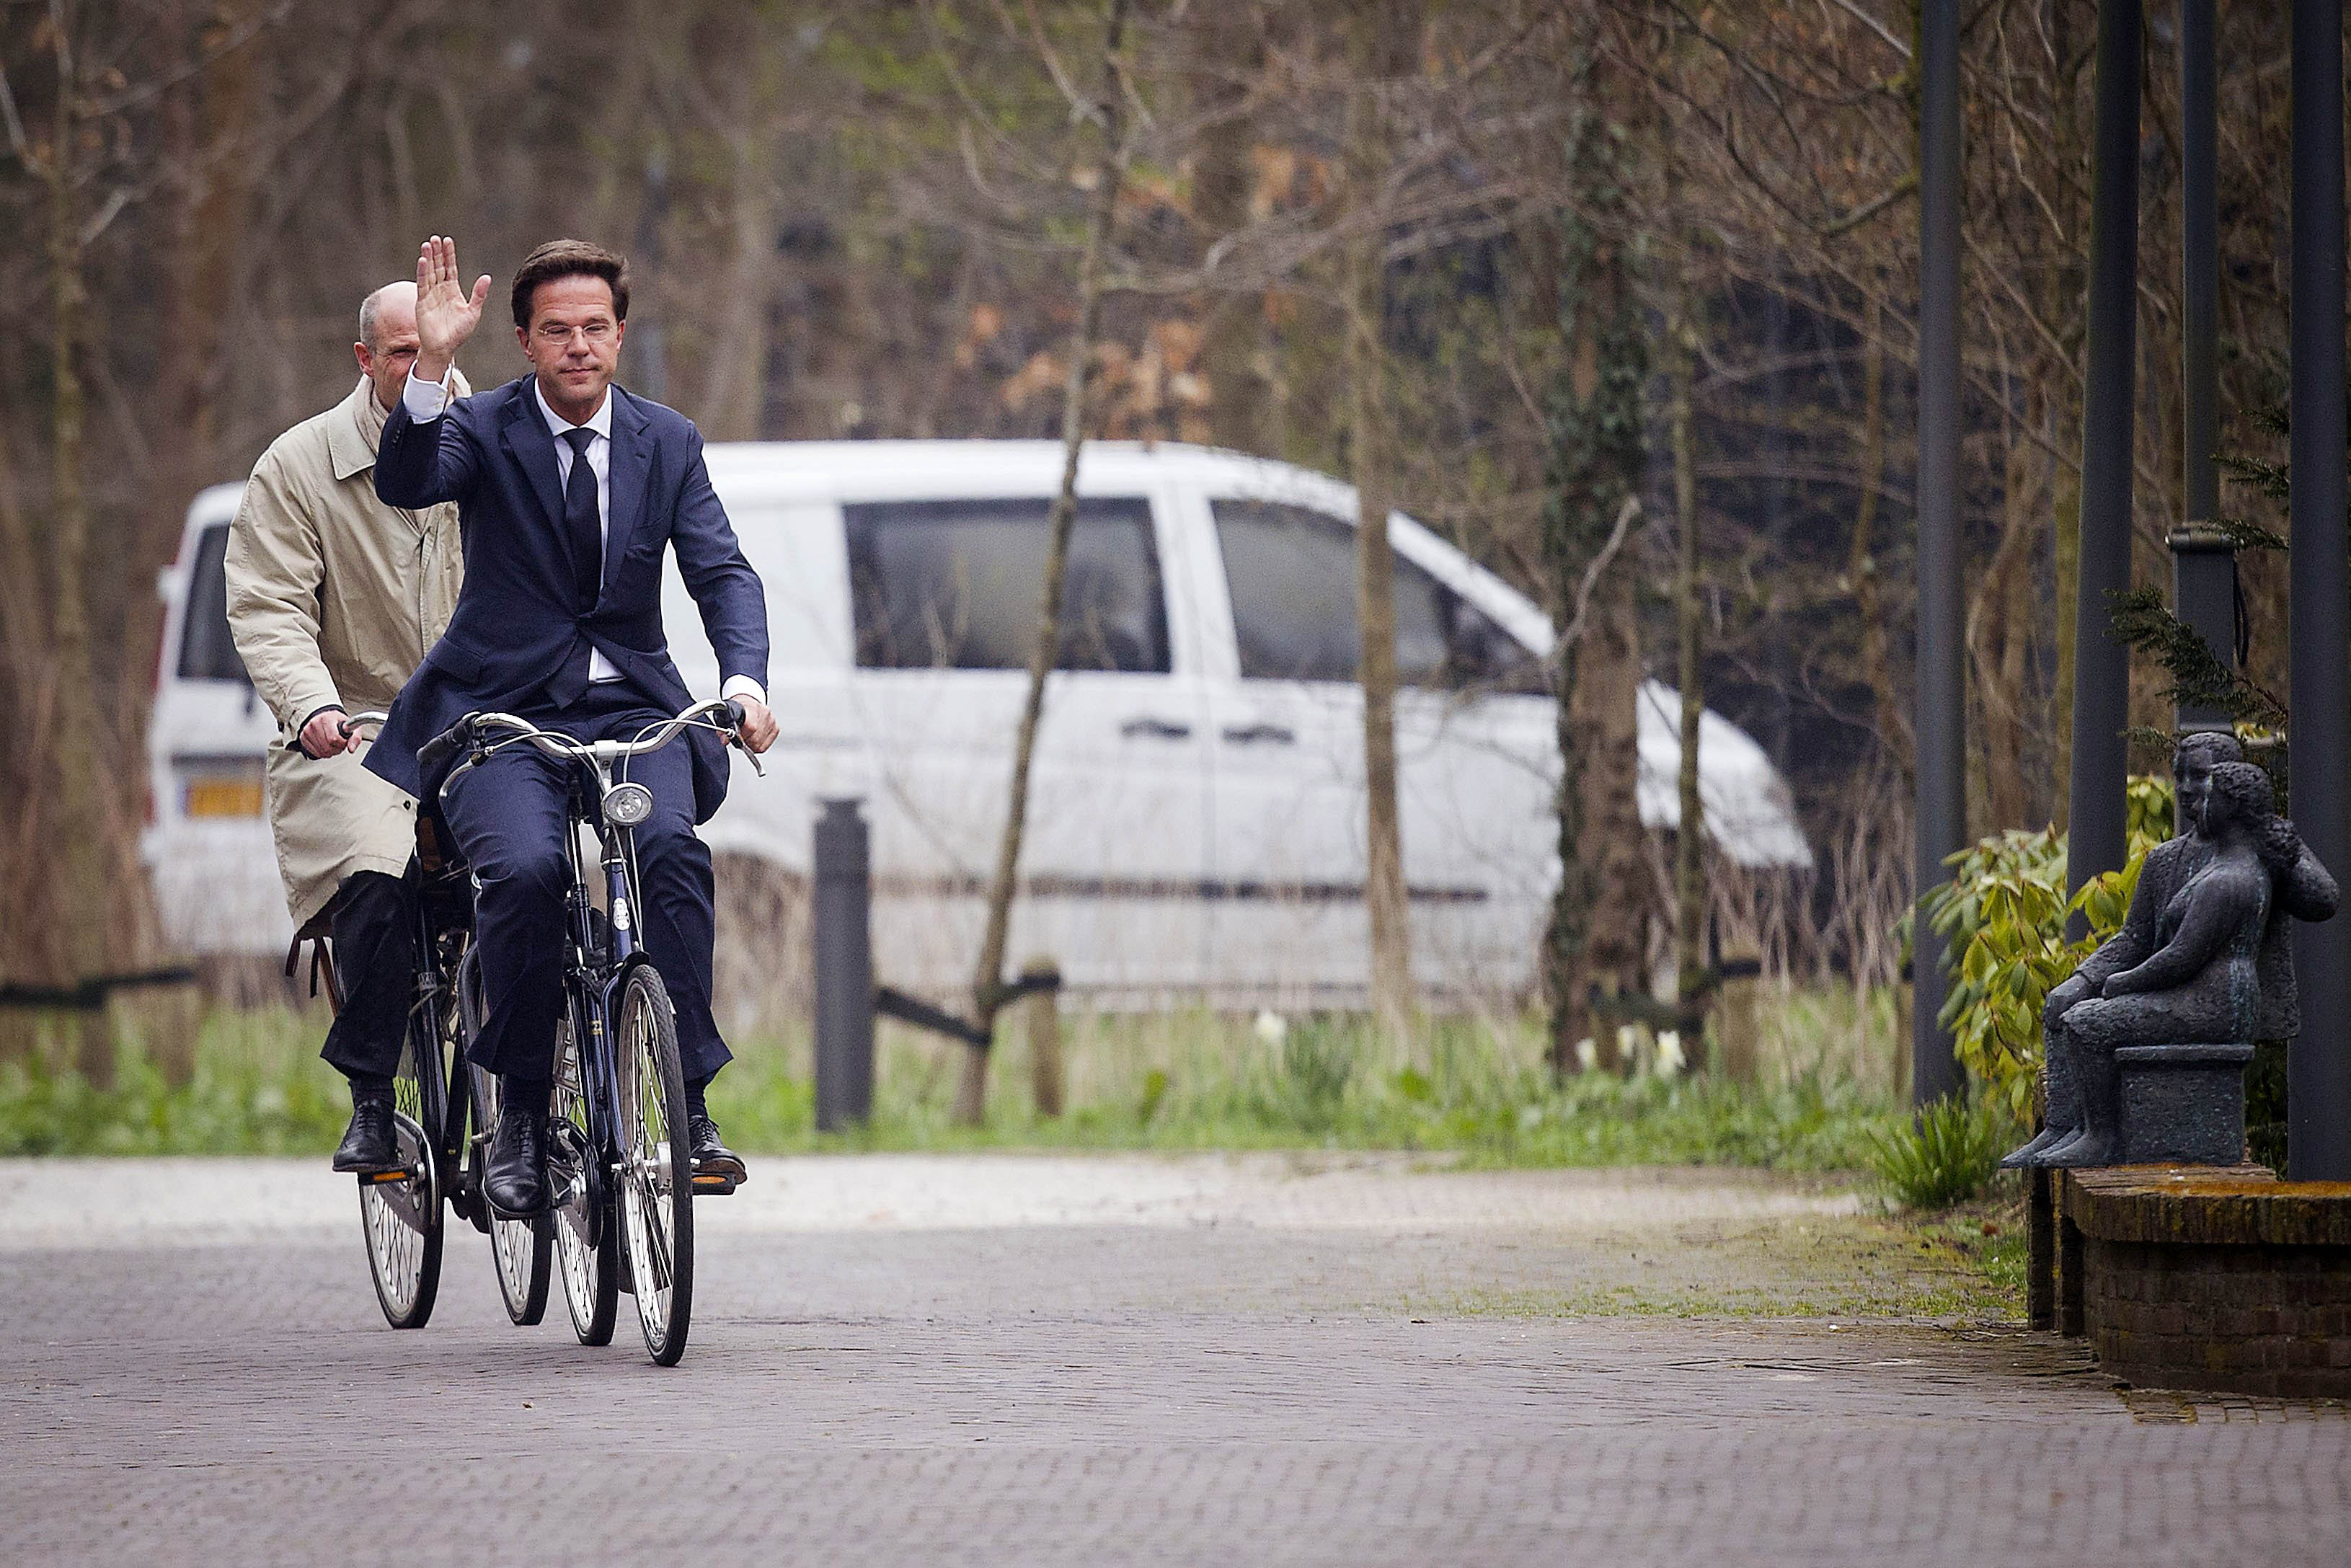 Dutch Prime Minister Mark Rutte (R) and Stef Blok from the People's Party for Freedom and Democracy (VVD) arrive on their bicycles at Catshuis, the official residence of the Prime Minister, in the Hague, on March 29, 2012. AFP PHOTO/ ANP EVERT-JAN DANIELS netherlands out (Photo credit should read Evert-Jan Daniels/AFP/Getty Images)